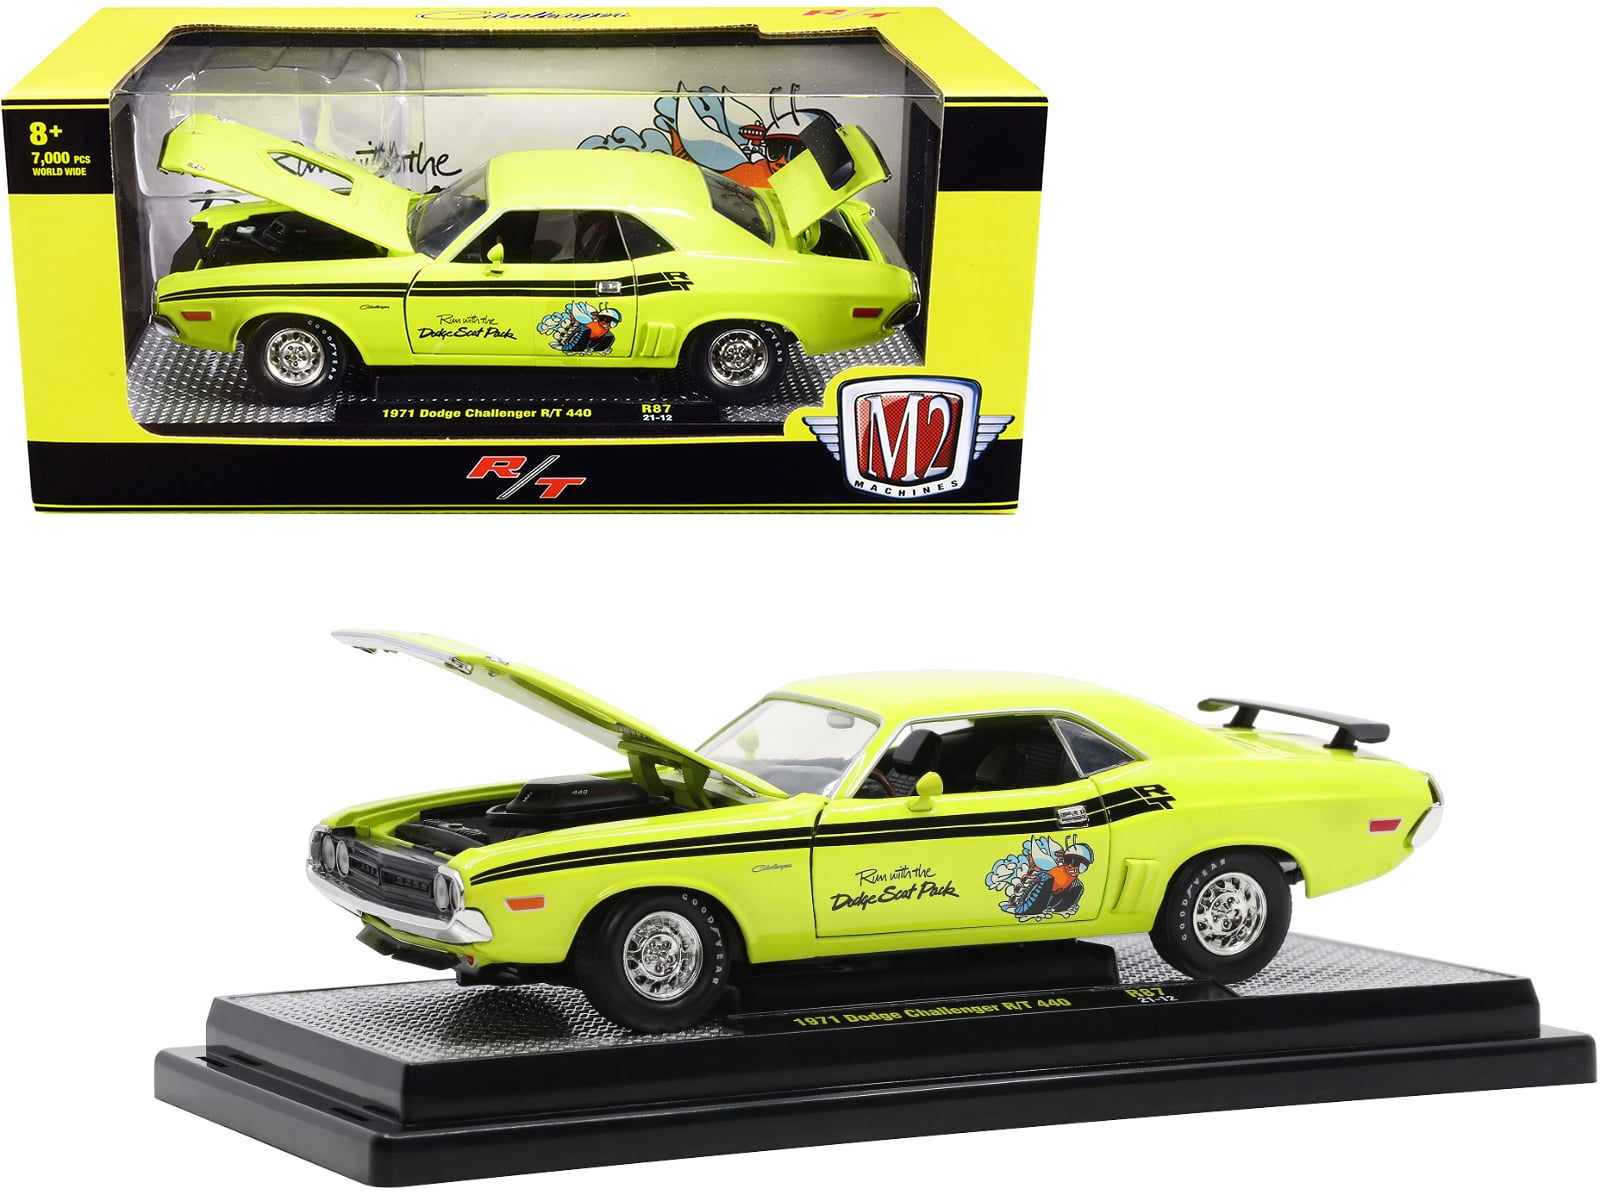 GreenLight 1:43 NCIS 2003-Current TV Series 1970 Dodge Challenger R/T 86579 